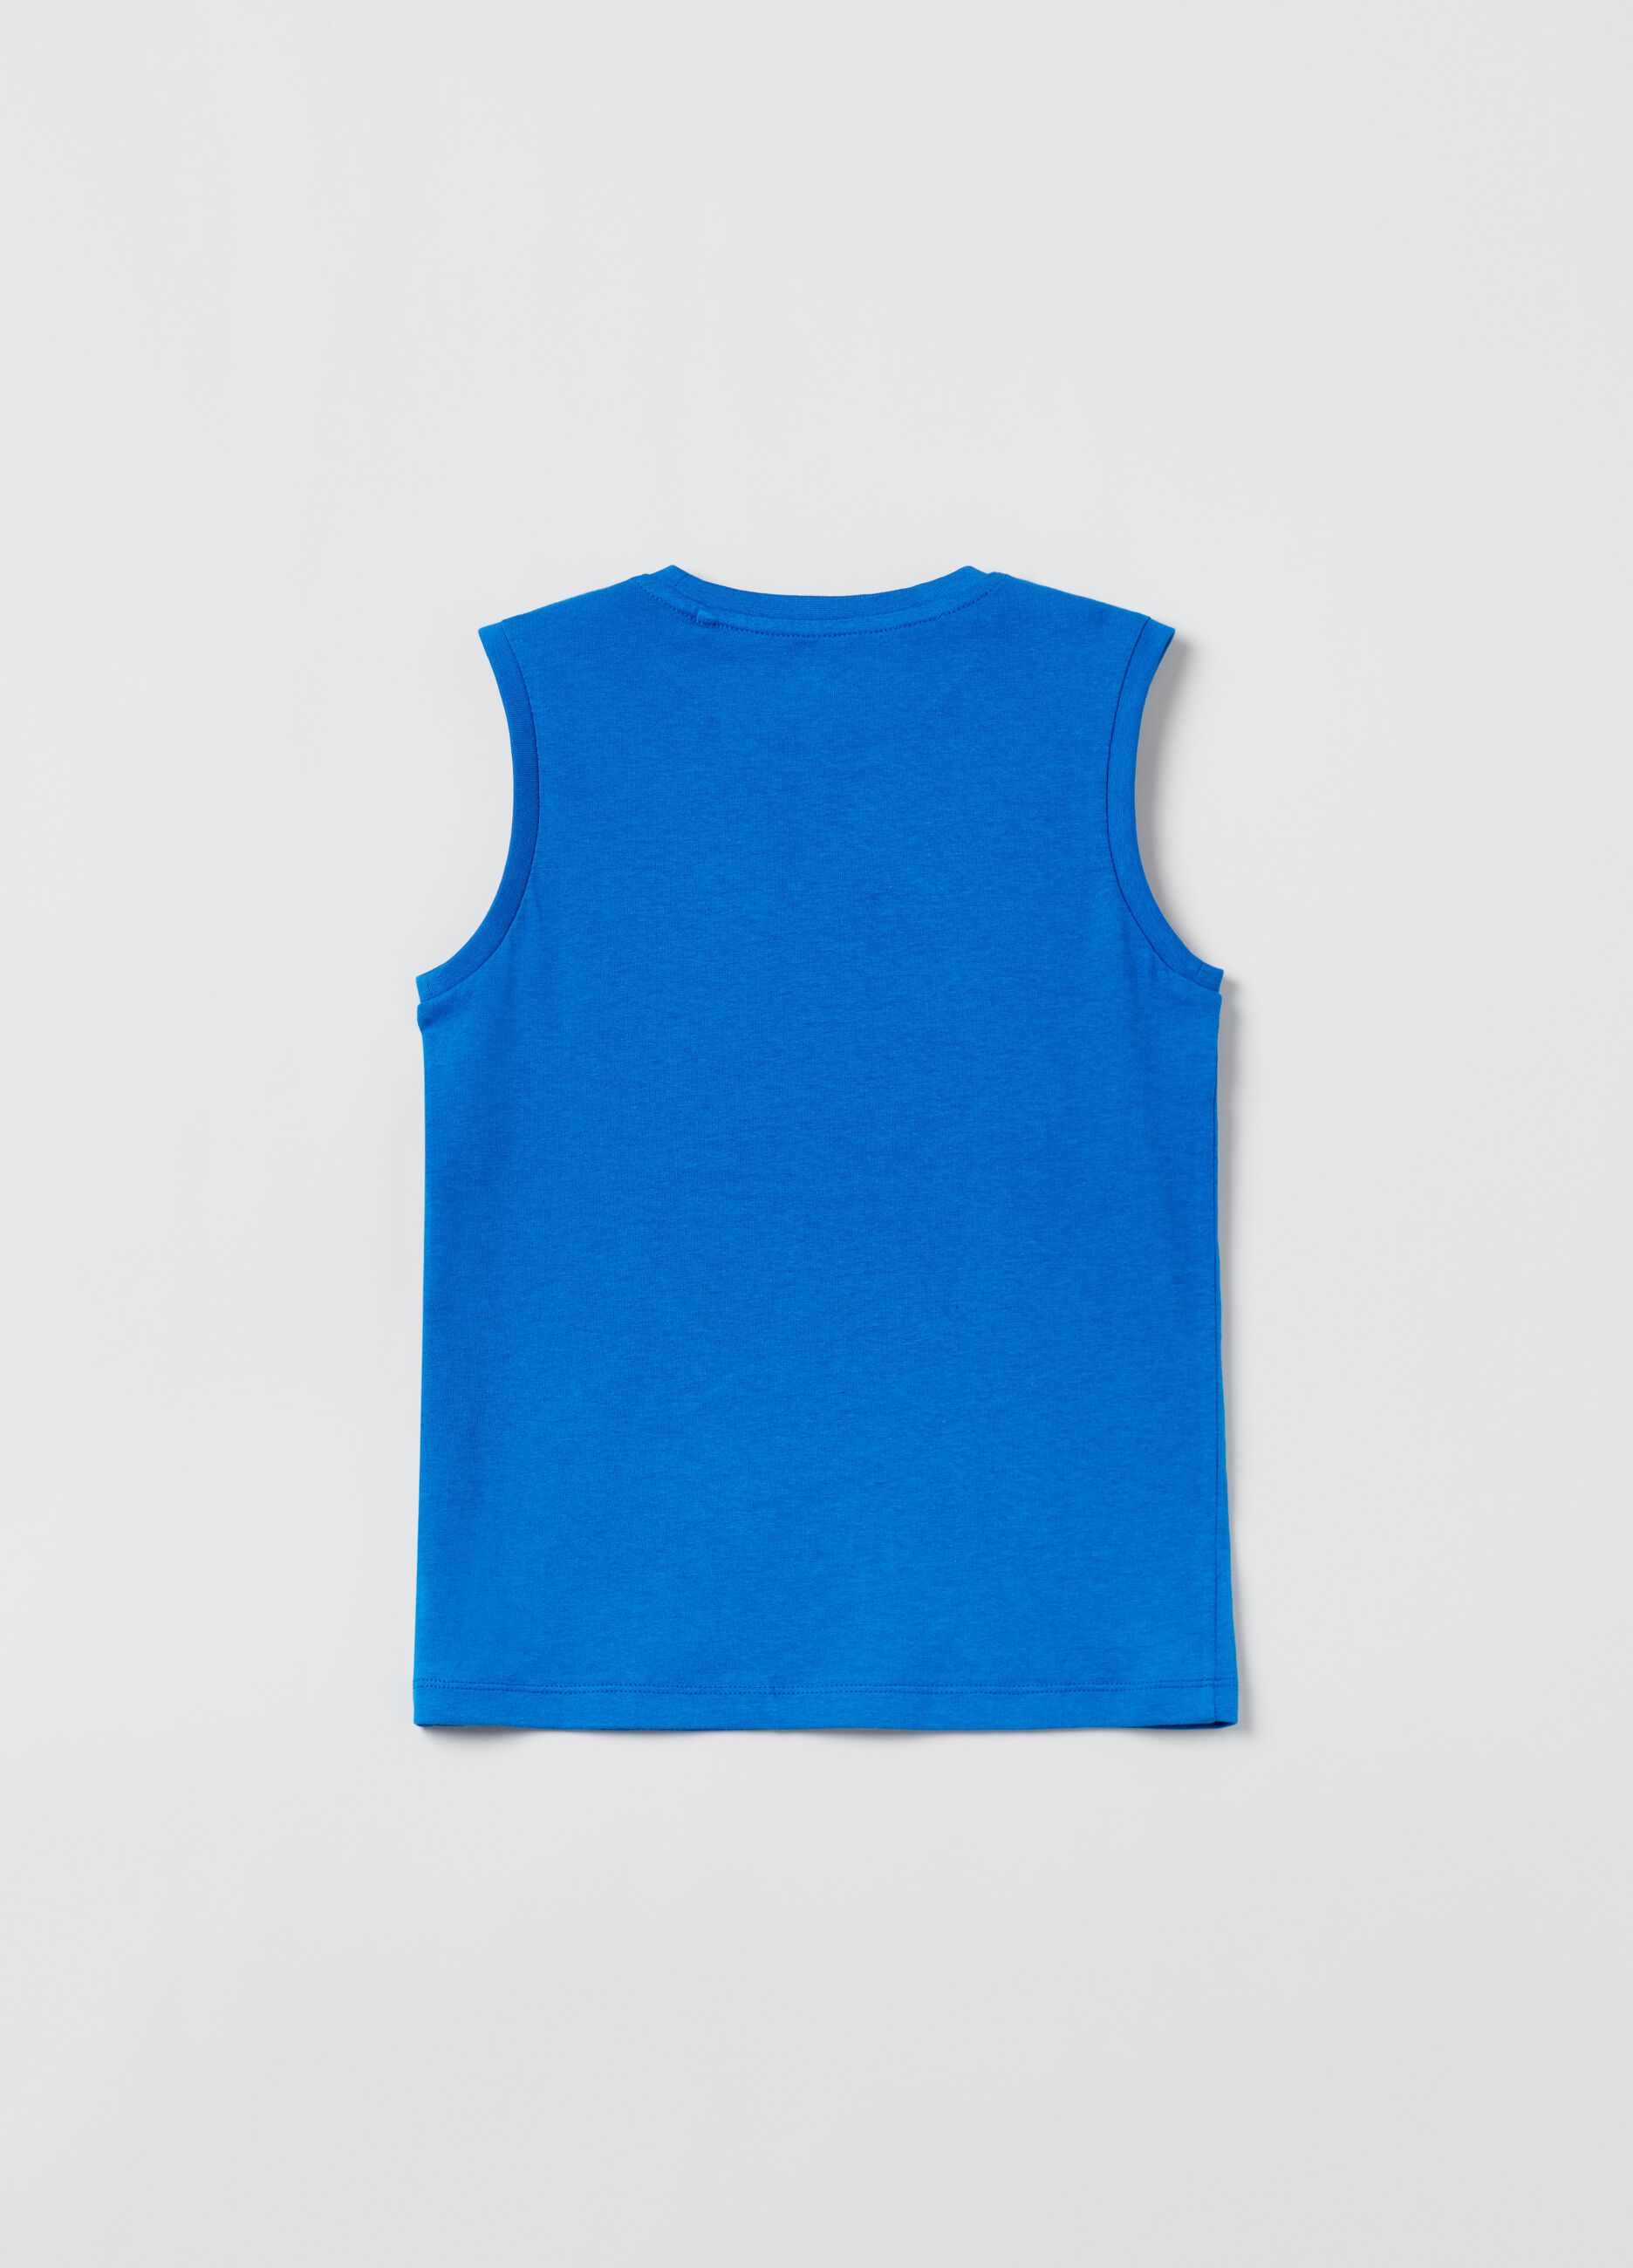 Racerback vest with round neck and print